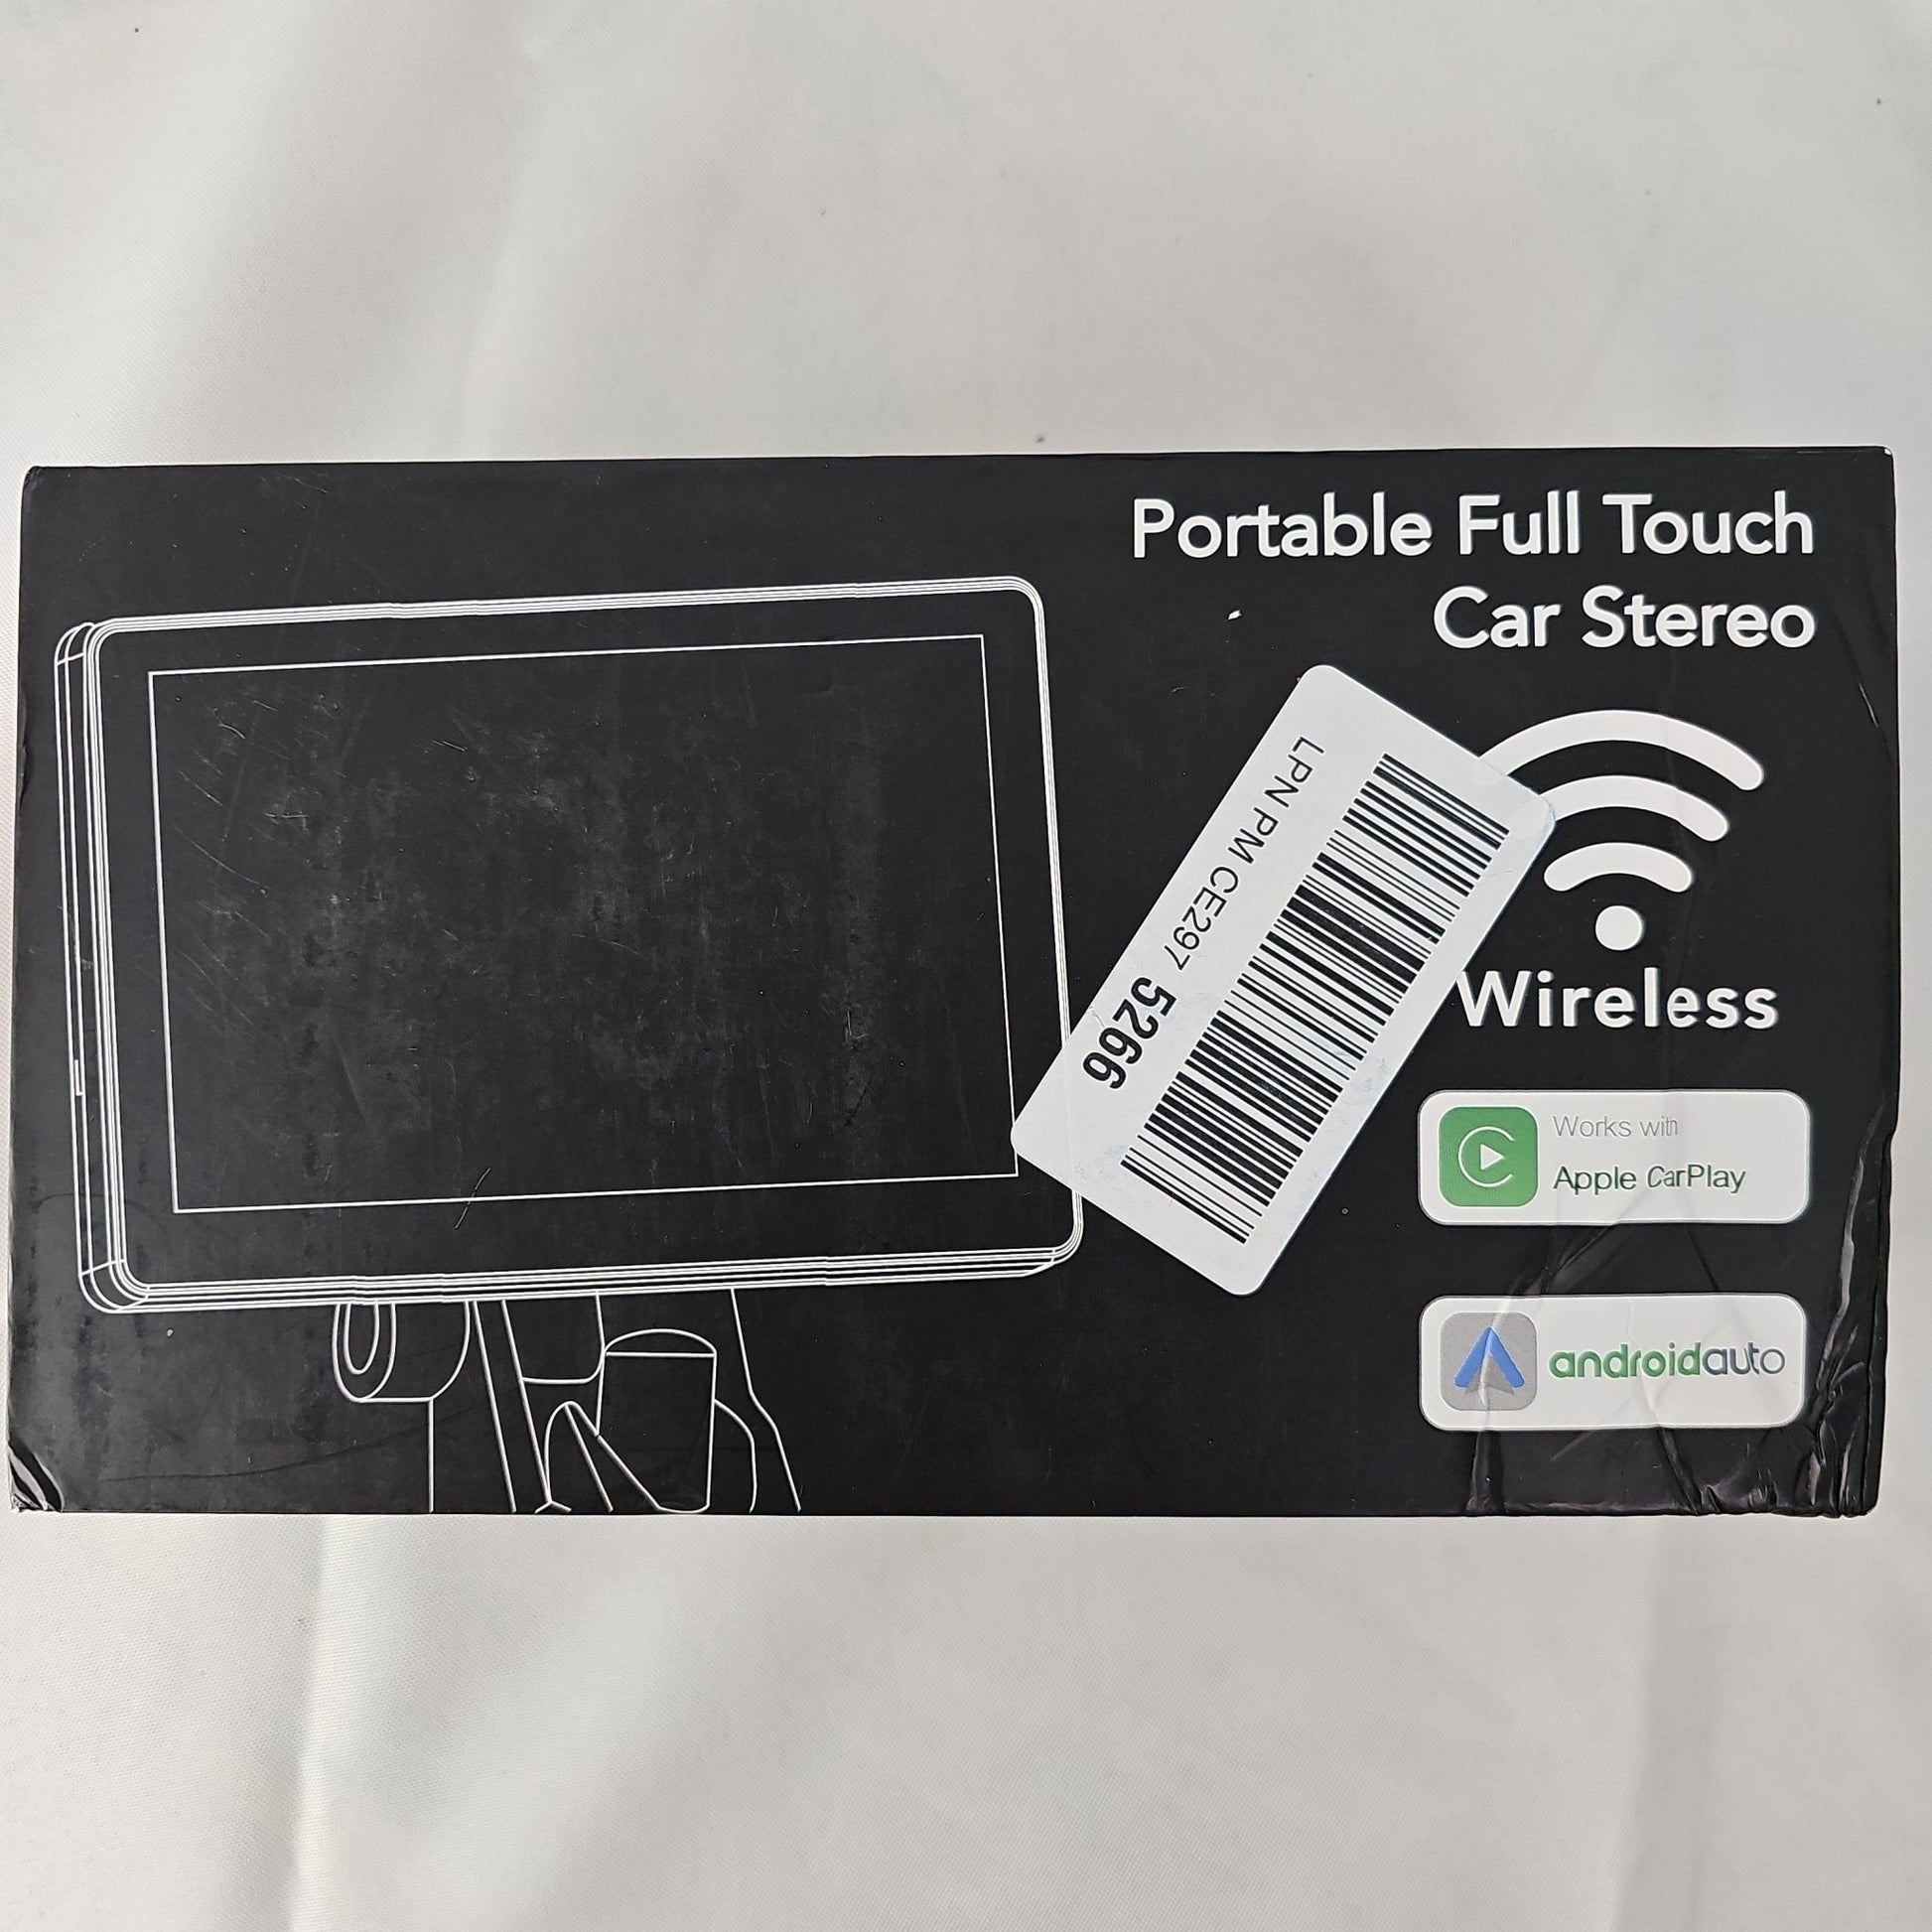 Portable Full Touch Car Stereo Wireless 7 in. - DQ Distribution